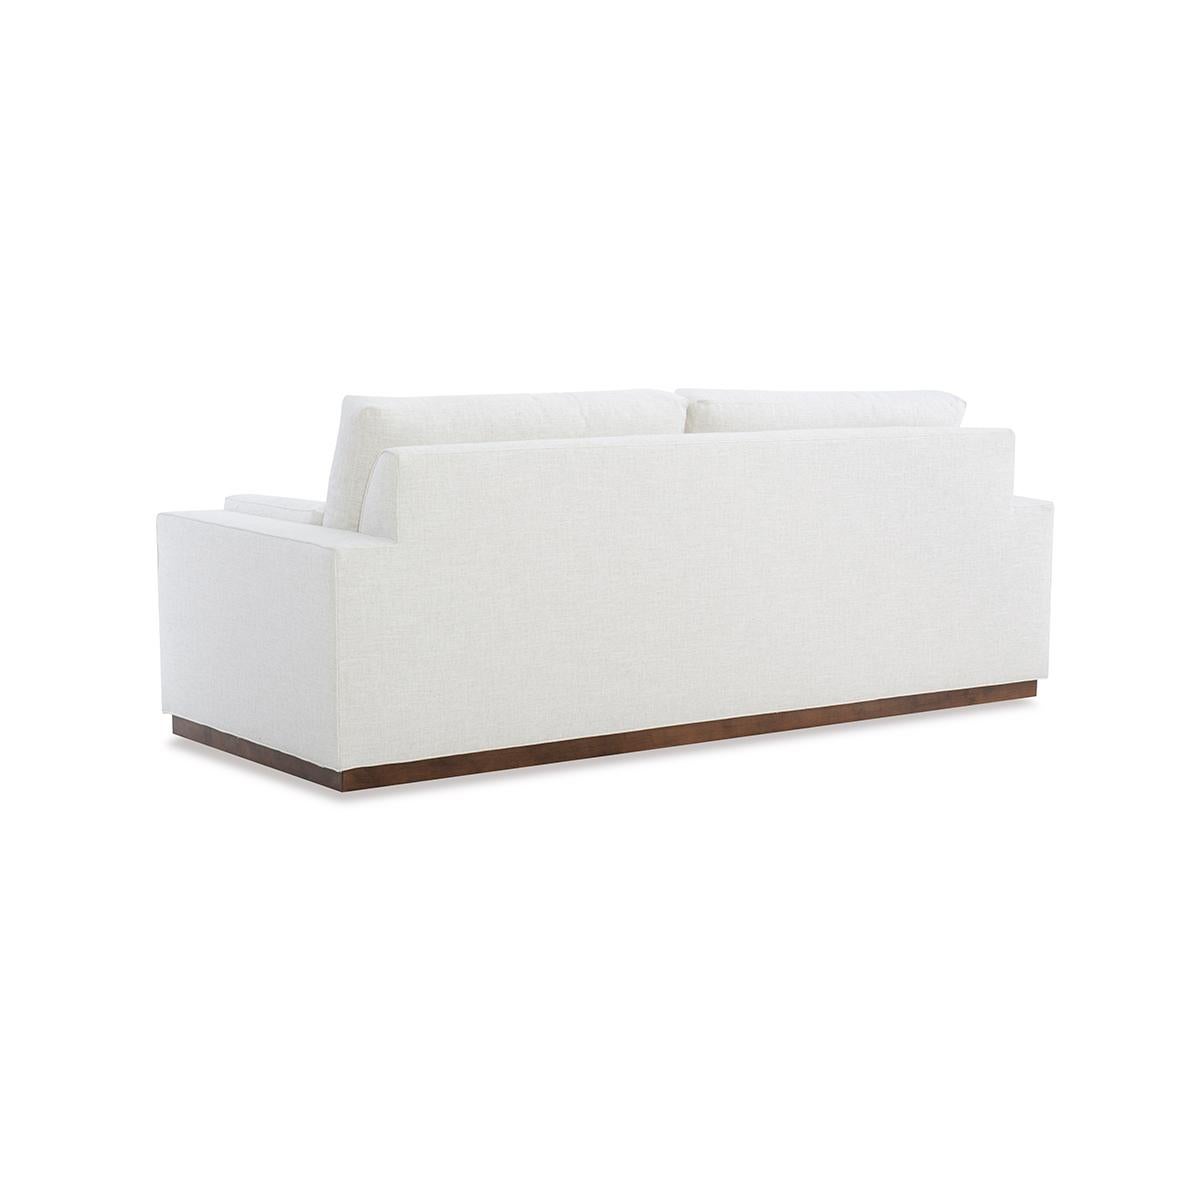 With two loose back cushions and a boxed cushion seat, with low profile arms, raised on a simple stepped-back wooden plinth base.

Proudly made in the USA, each piece boasts traditional 8-way hand-tied construction and toxin-free, kiln-dried solid